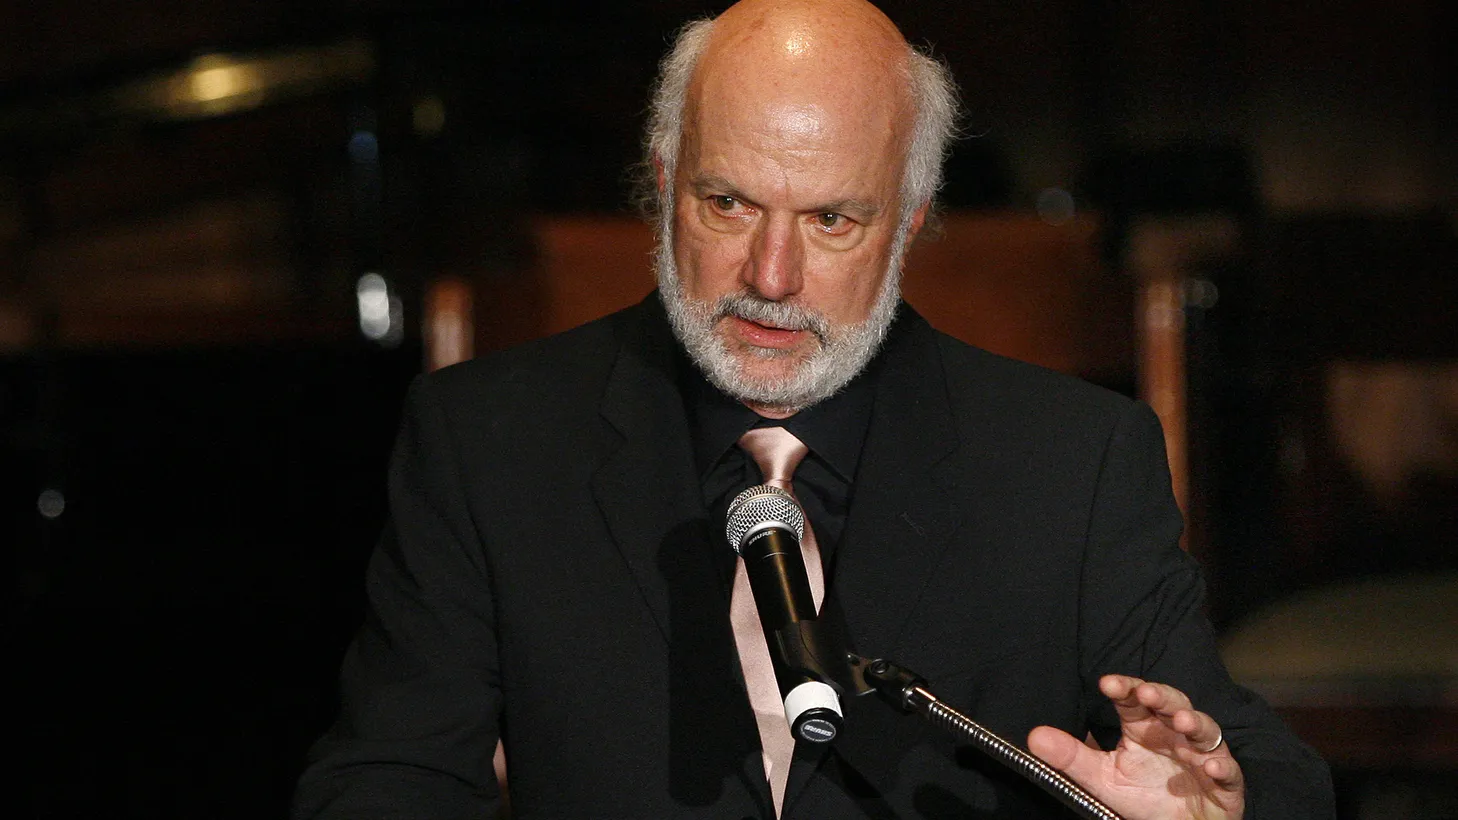 Producer and director James Burrows accepts the Academy of Television Arts & Sciences Hall of Fame award in Beverly Hills, California on December 14, 2006. The Academy of Television Arts & Sciences Hall of Fame honors individuals who have made extraordinary contributions to television.